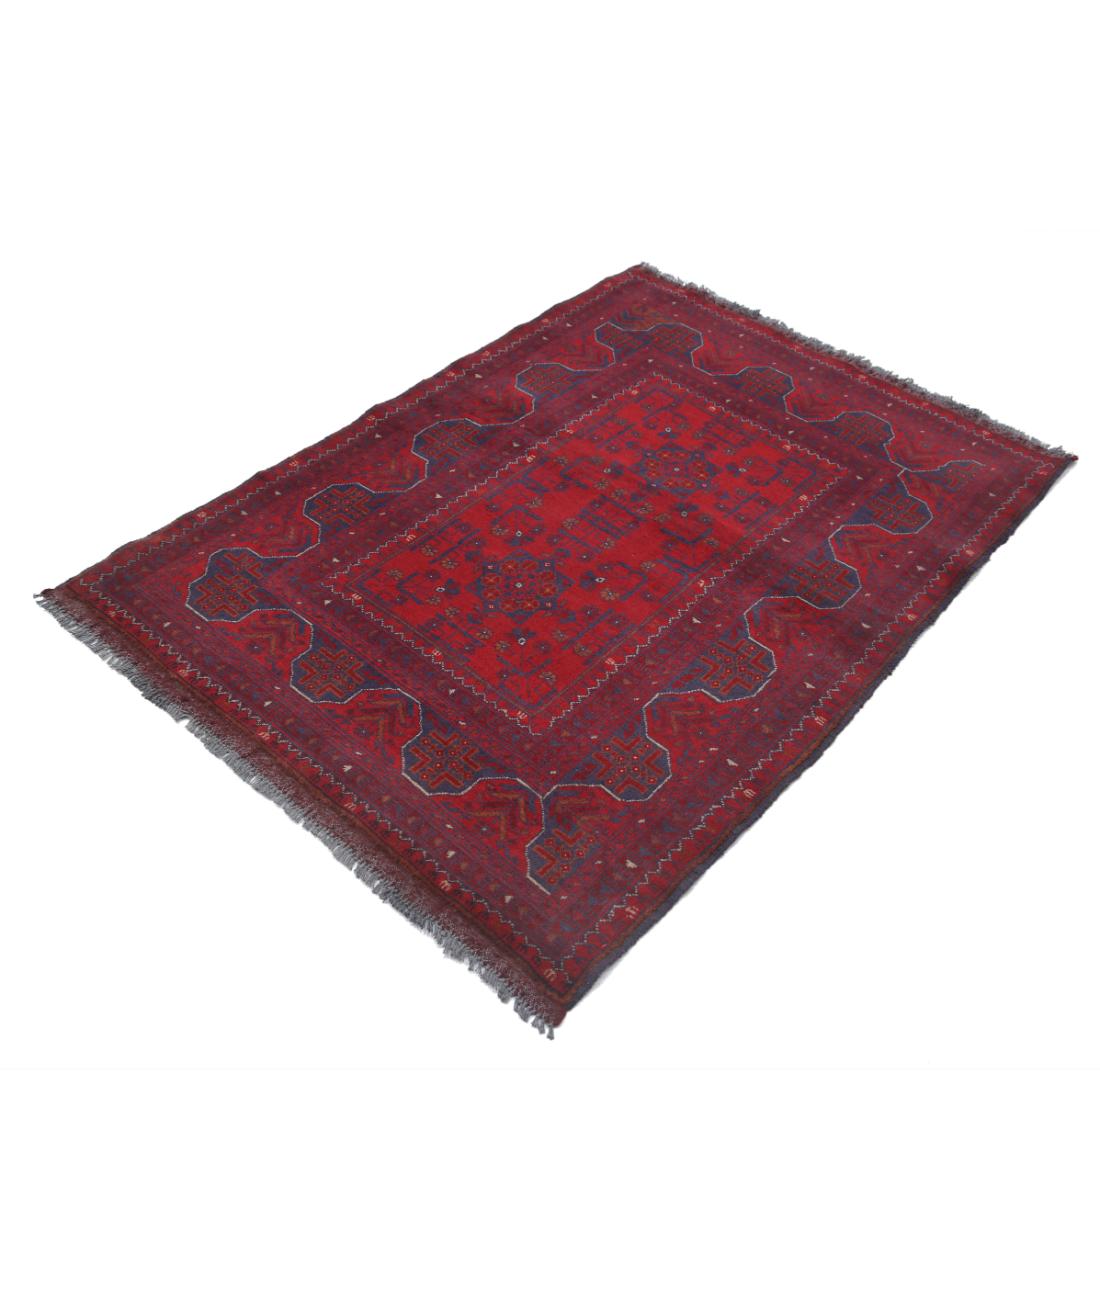 Afghan 3' 6" X 4' 10" Hand-Knotted Wool Rug 3' 6" X 4' 10" (107 X 147) / Red / Blue